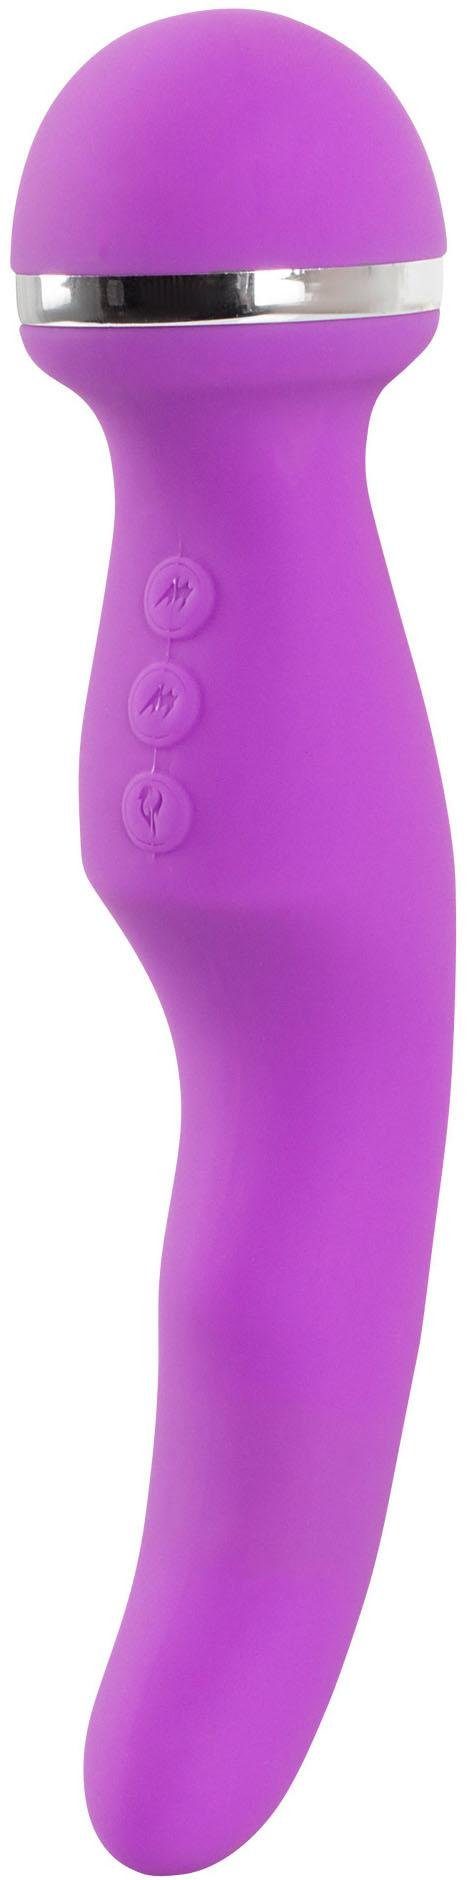 Massager 2-in-1 Warming Vibe, Wand Rechargeable You2Toys